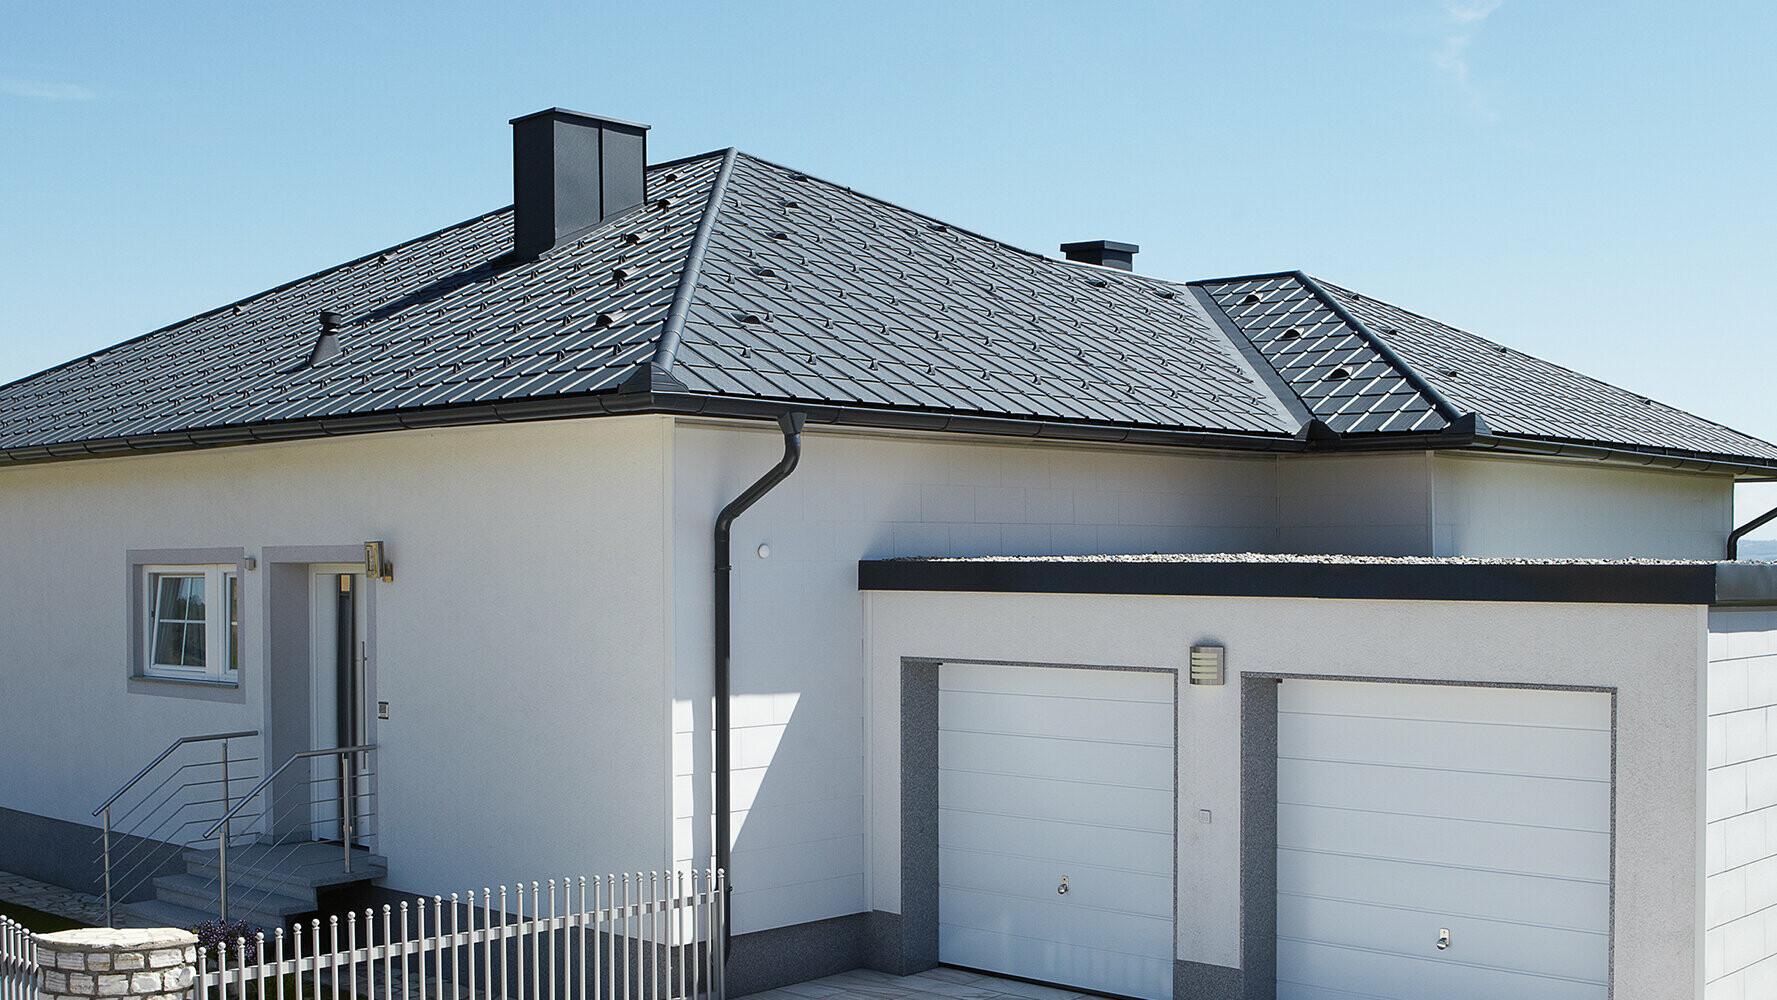 Renovated bungalow with hip roof and PREFA roof tile in anthracite  . A double garage stands next to it.